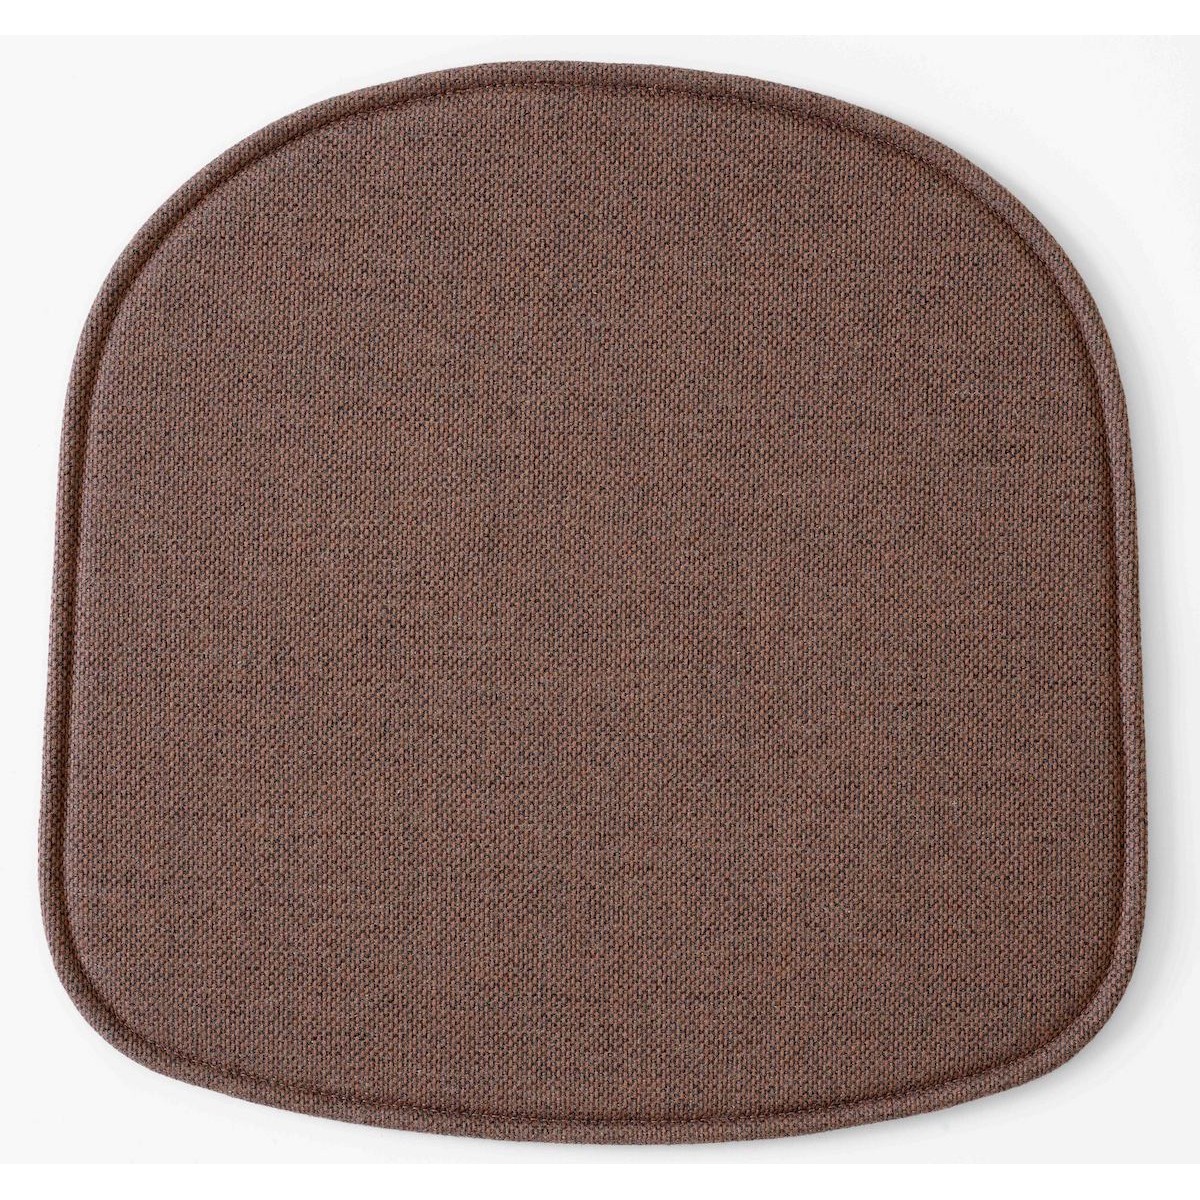 Rely HW6 Seat Pad – Re-Wool 378